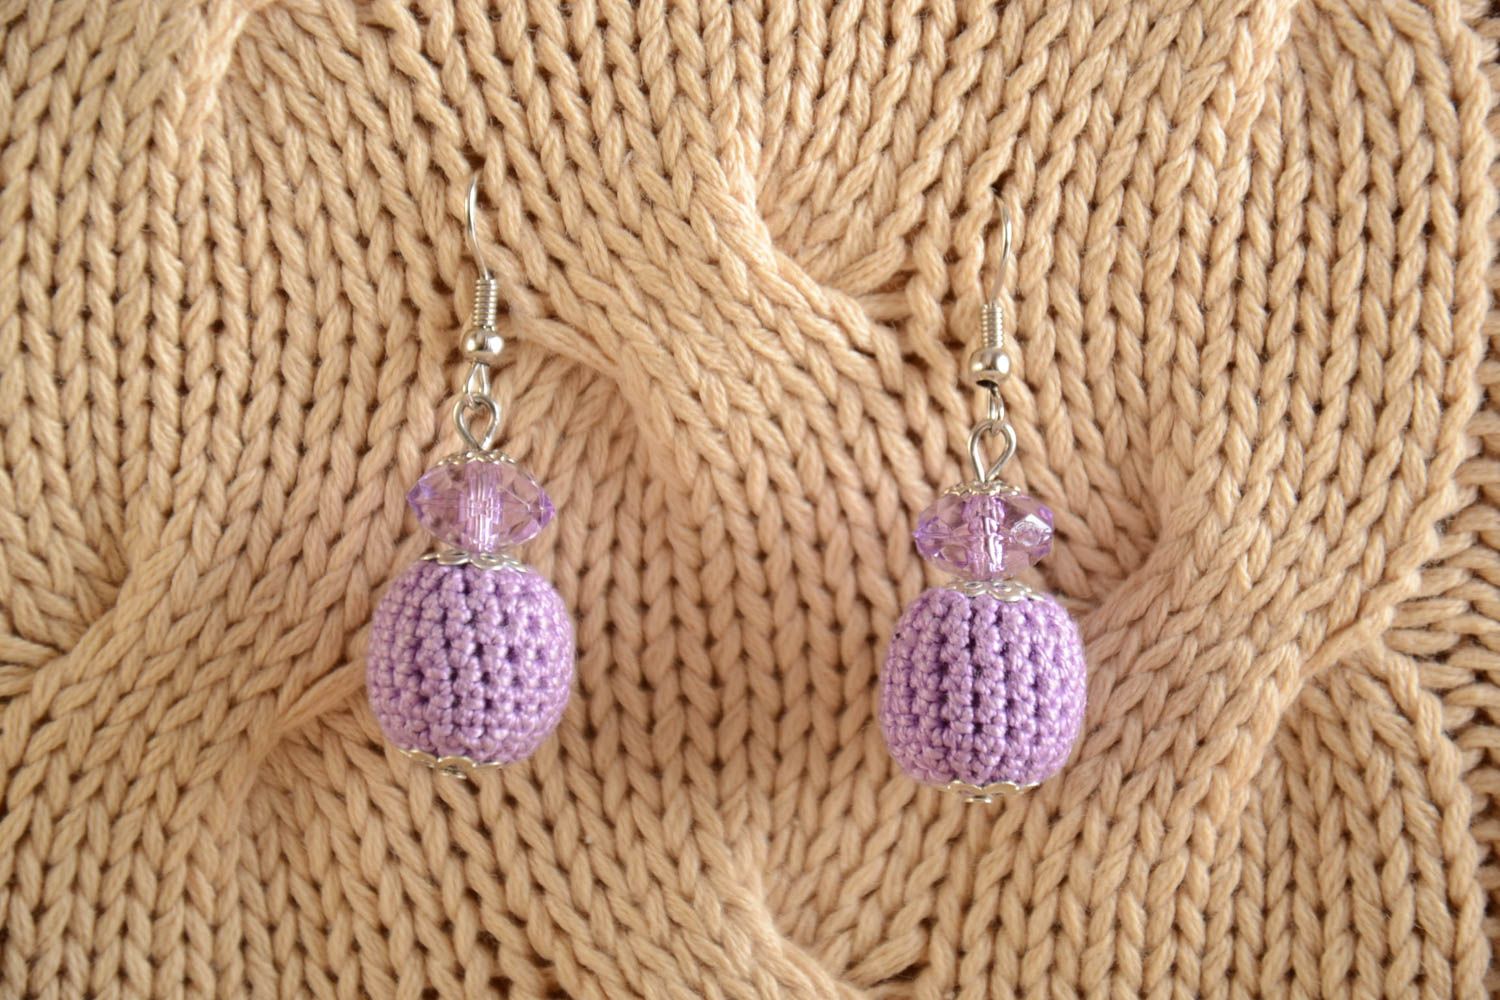 Handmade wooden bead earrings crocheted over with violet cotton threads photo 1